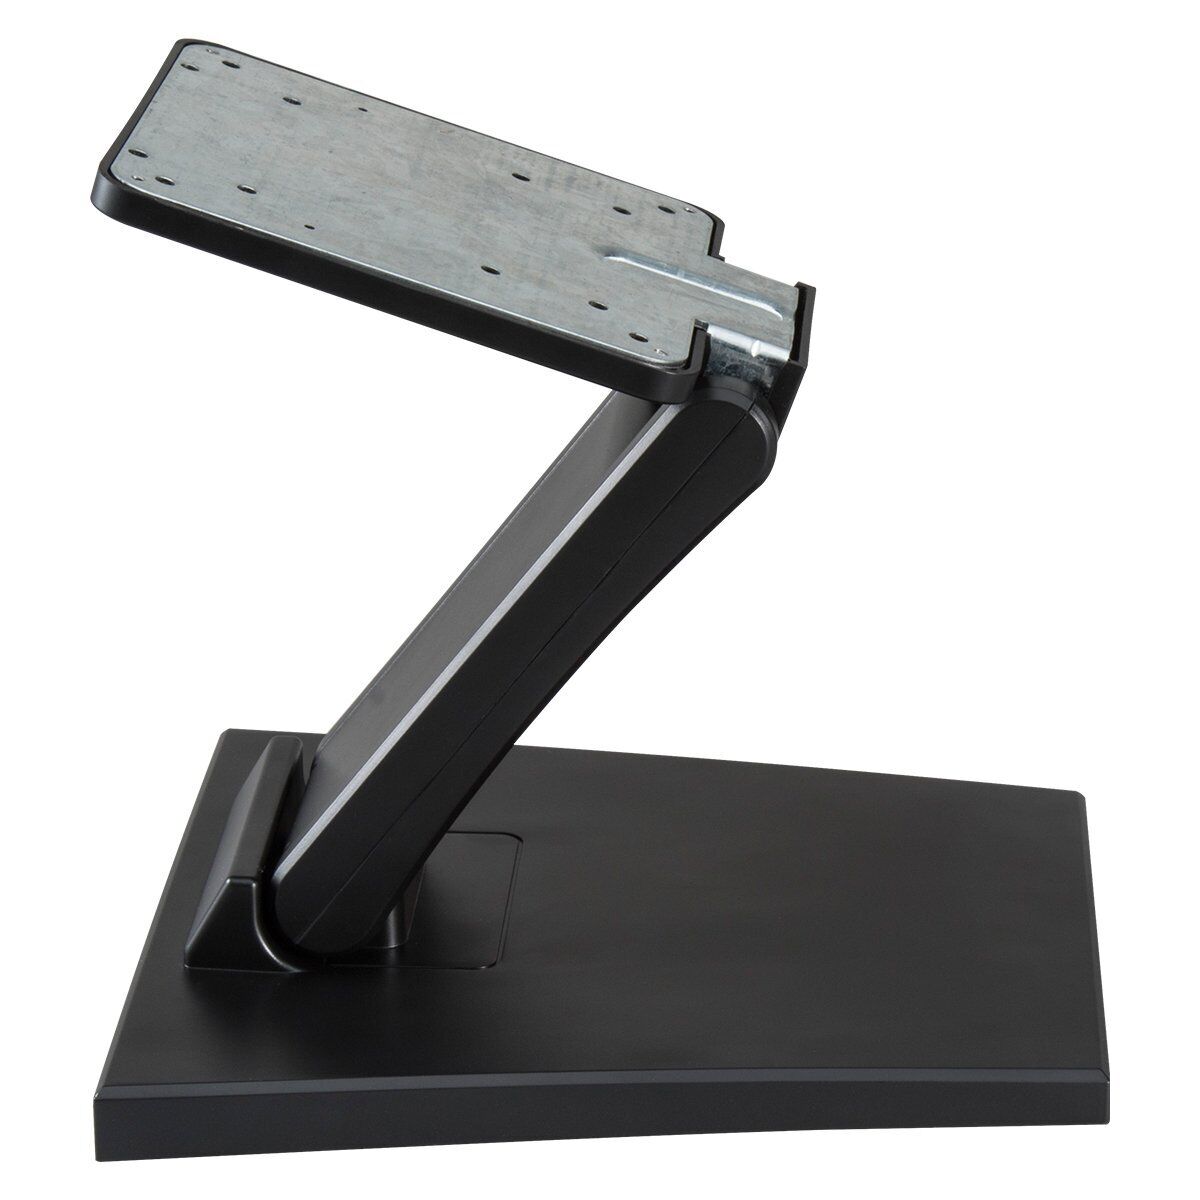 WS-03A Adjustable LCD TV Stand Folding Metal Monitor Desk Stand With VESA Hole